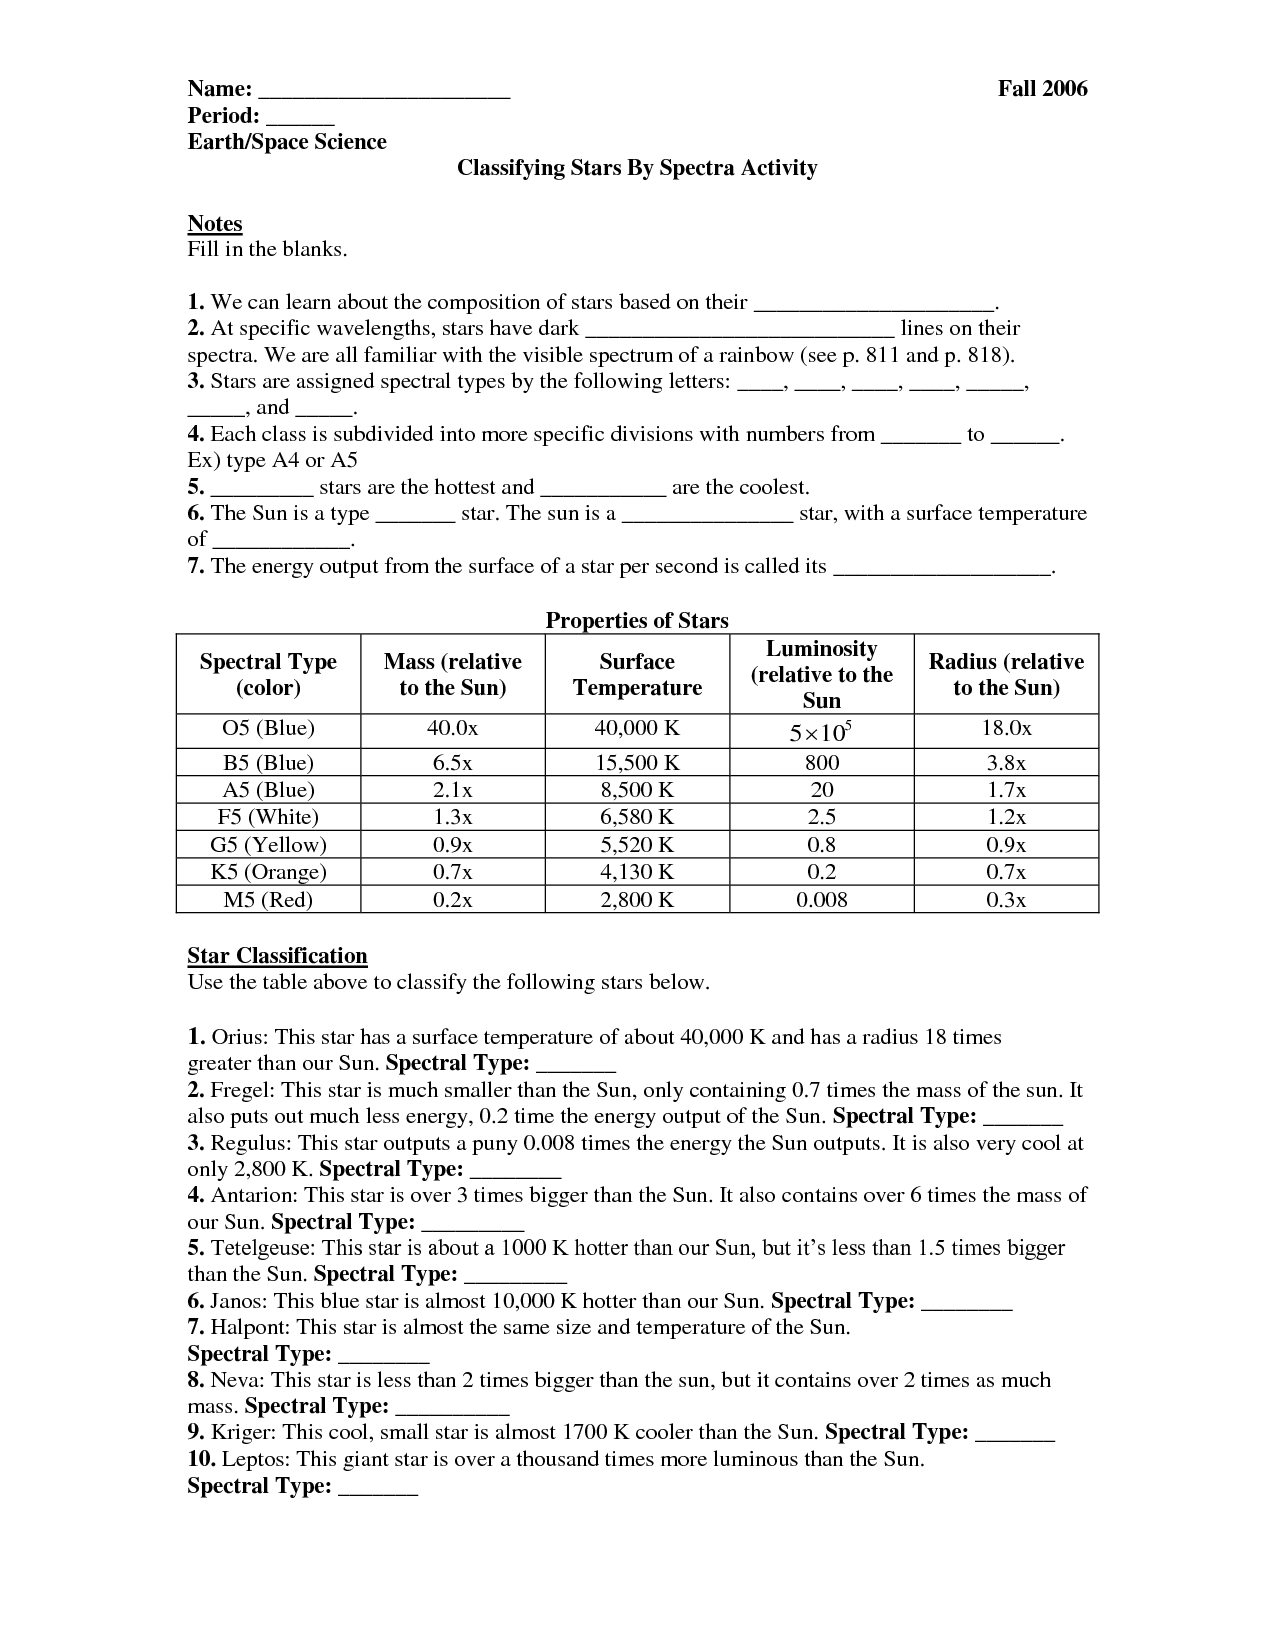 Worksheet Classifying Stars by Spectra